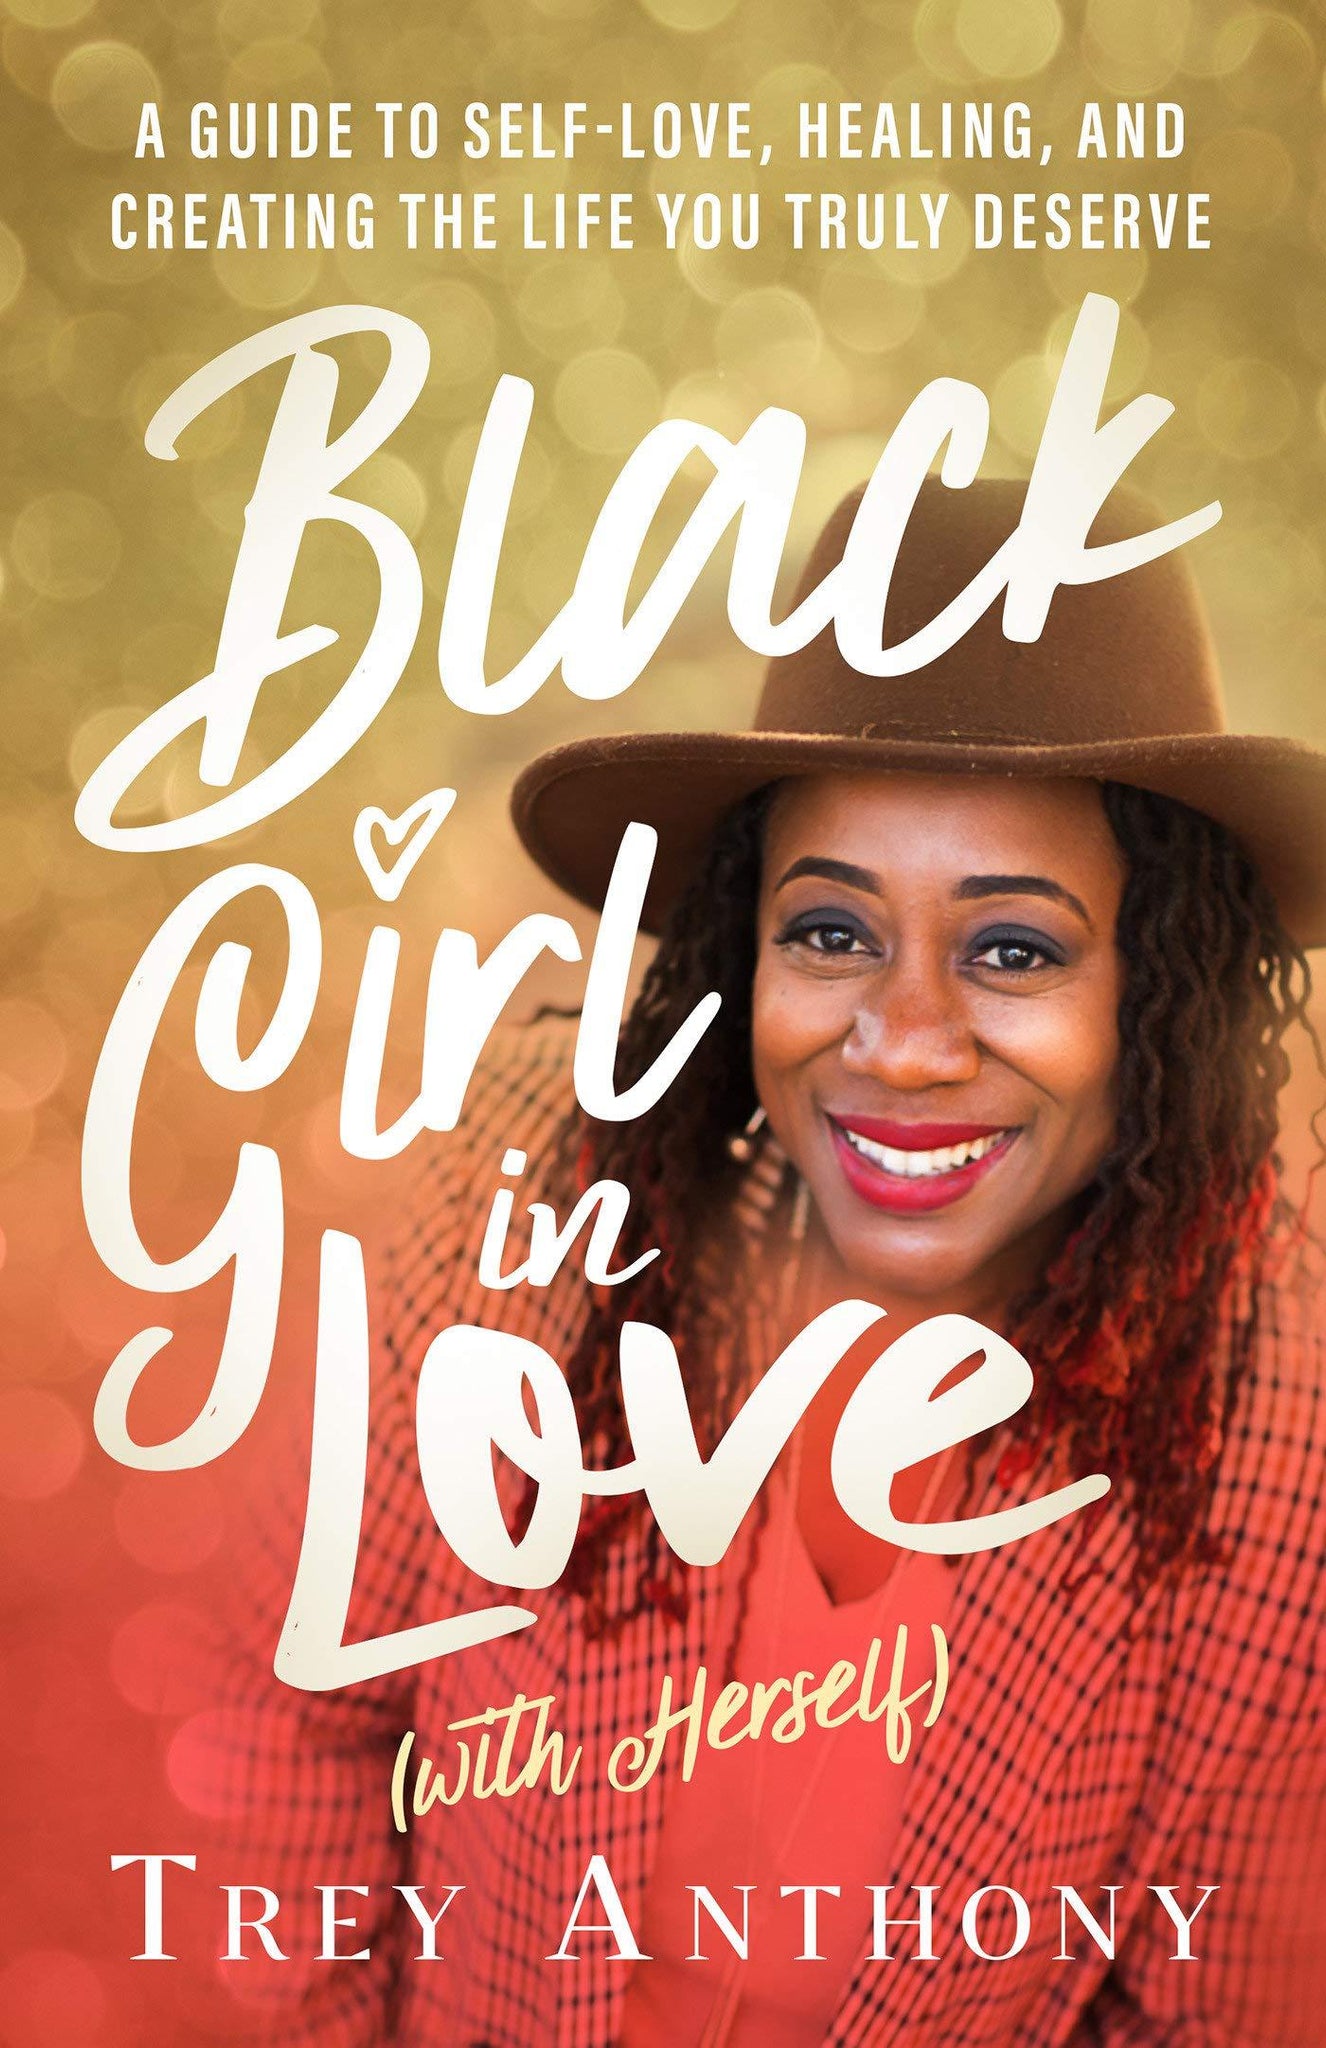 Black Girl in Love (with Herself): A Guide to Self-Love, Healing, and Creating the Life You Truly Deserve - ShopQueer.co